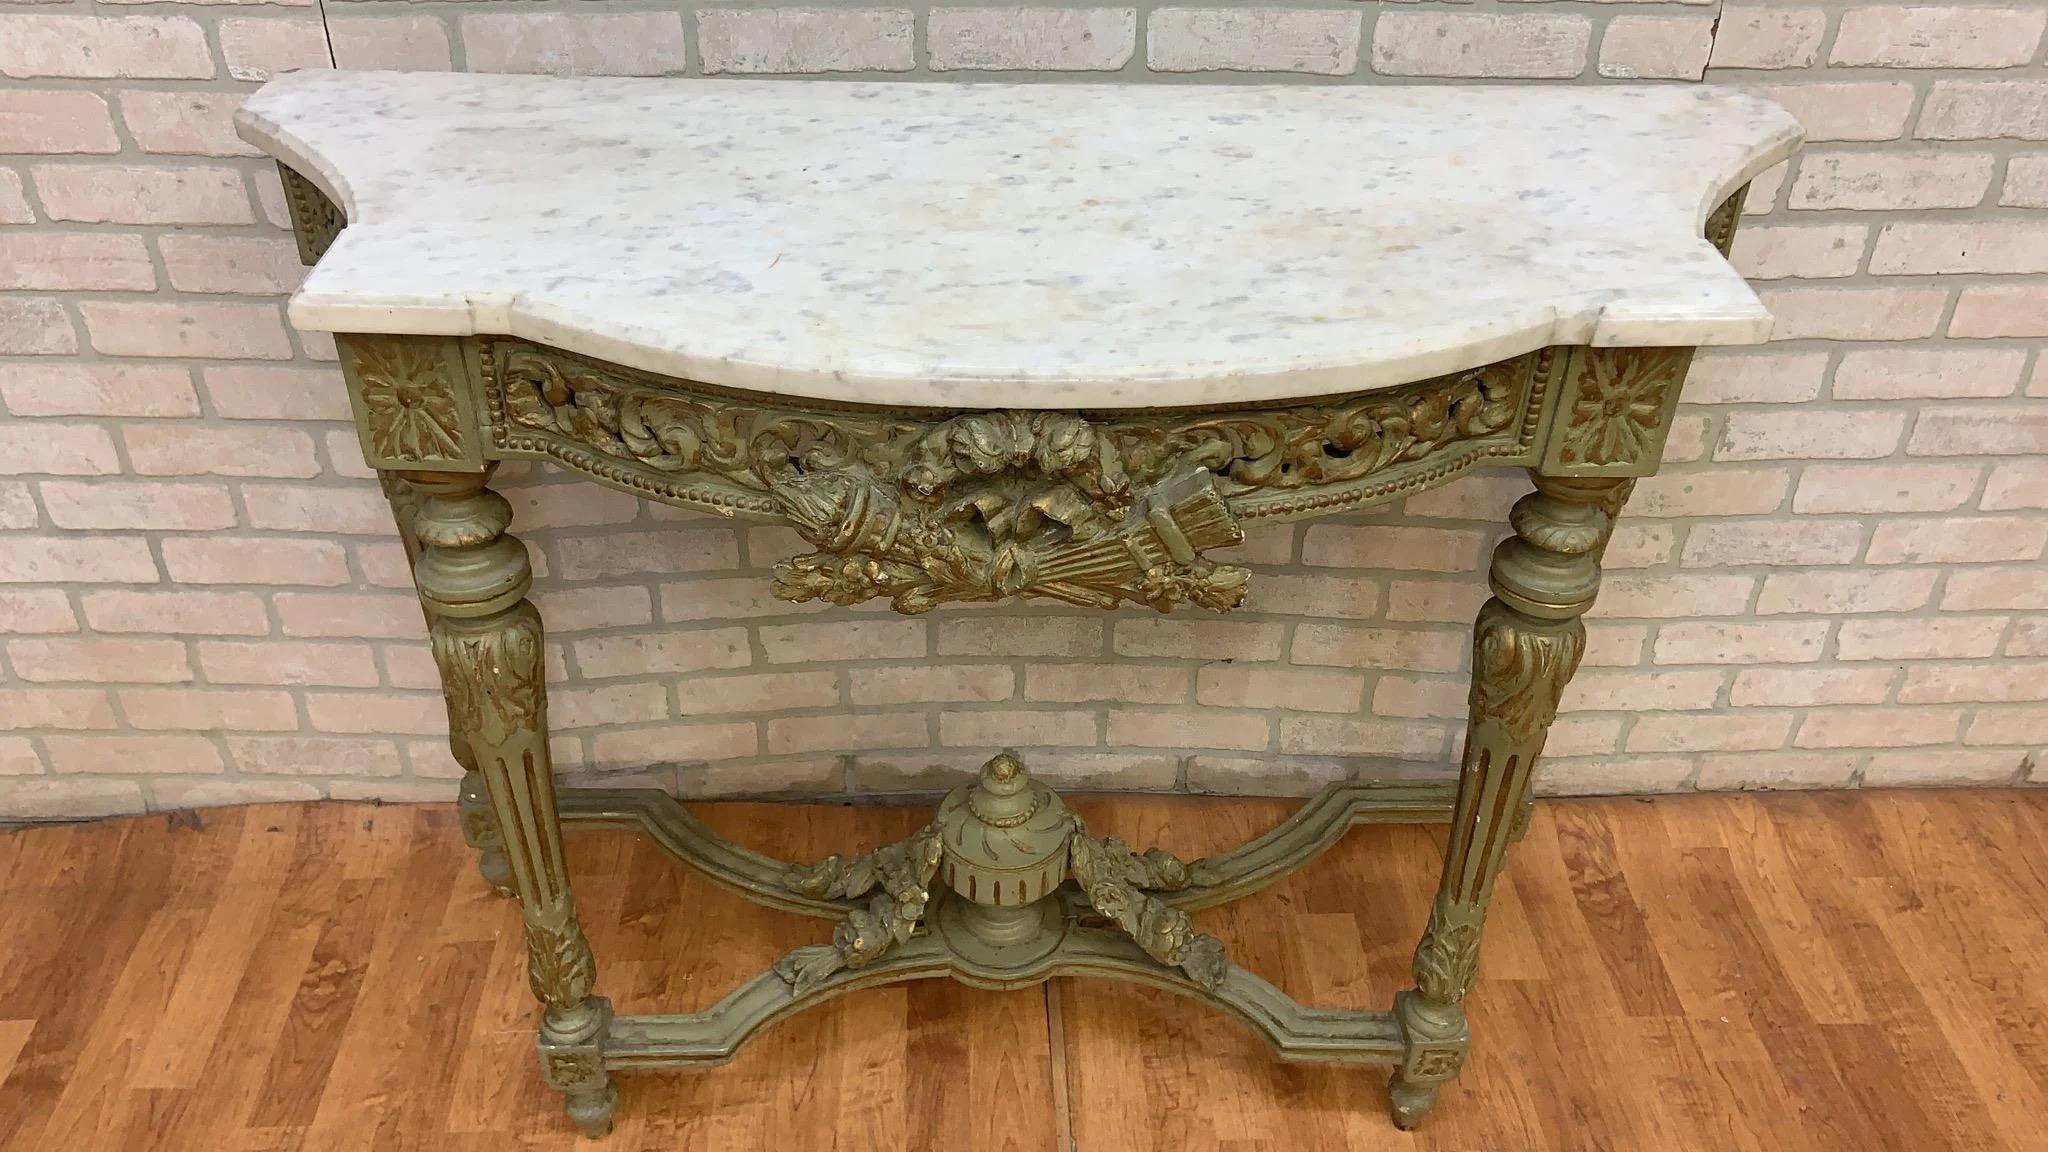 Vintage French Neoclassical Green Painted Console w/ Italian Carrara Marble Top For Sale 5